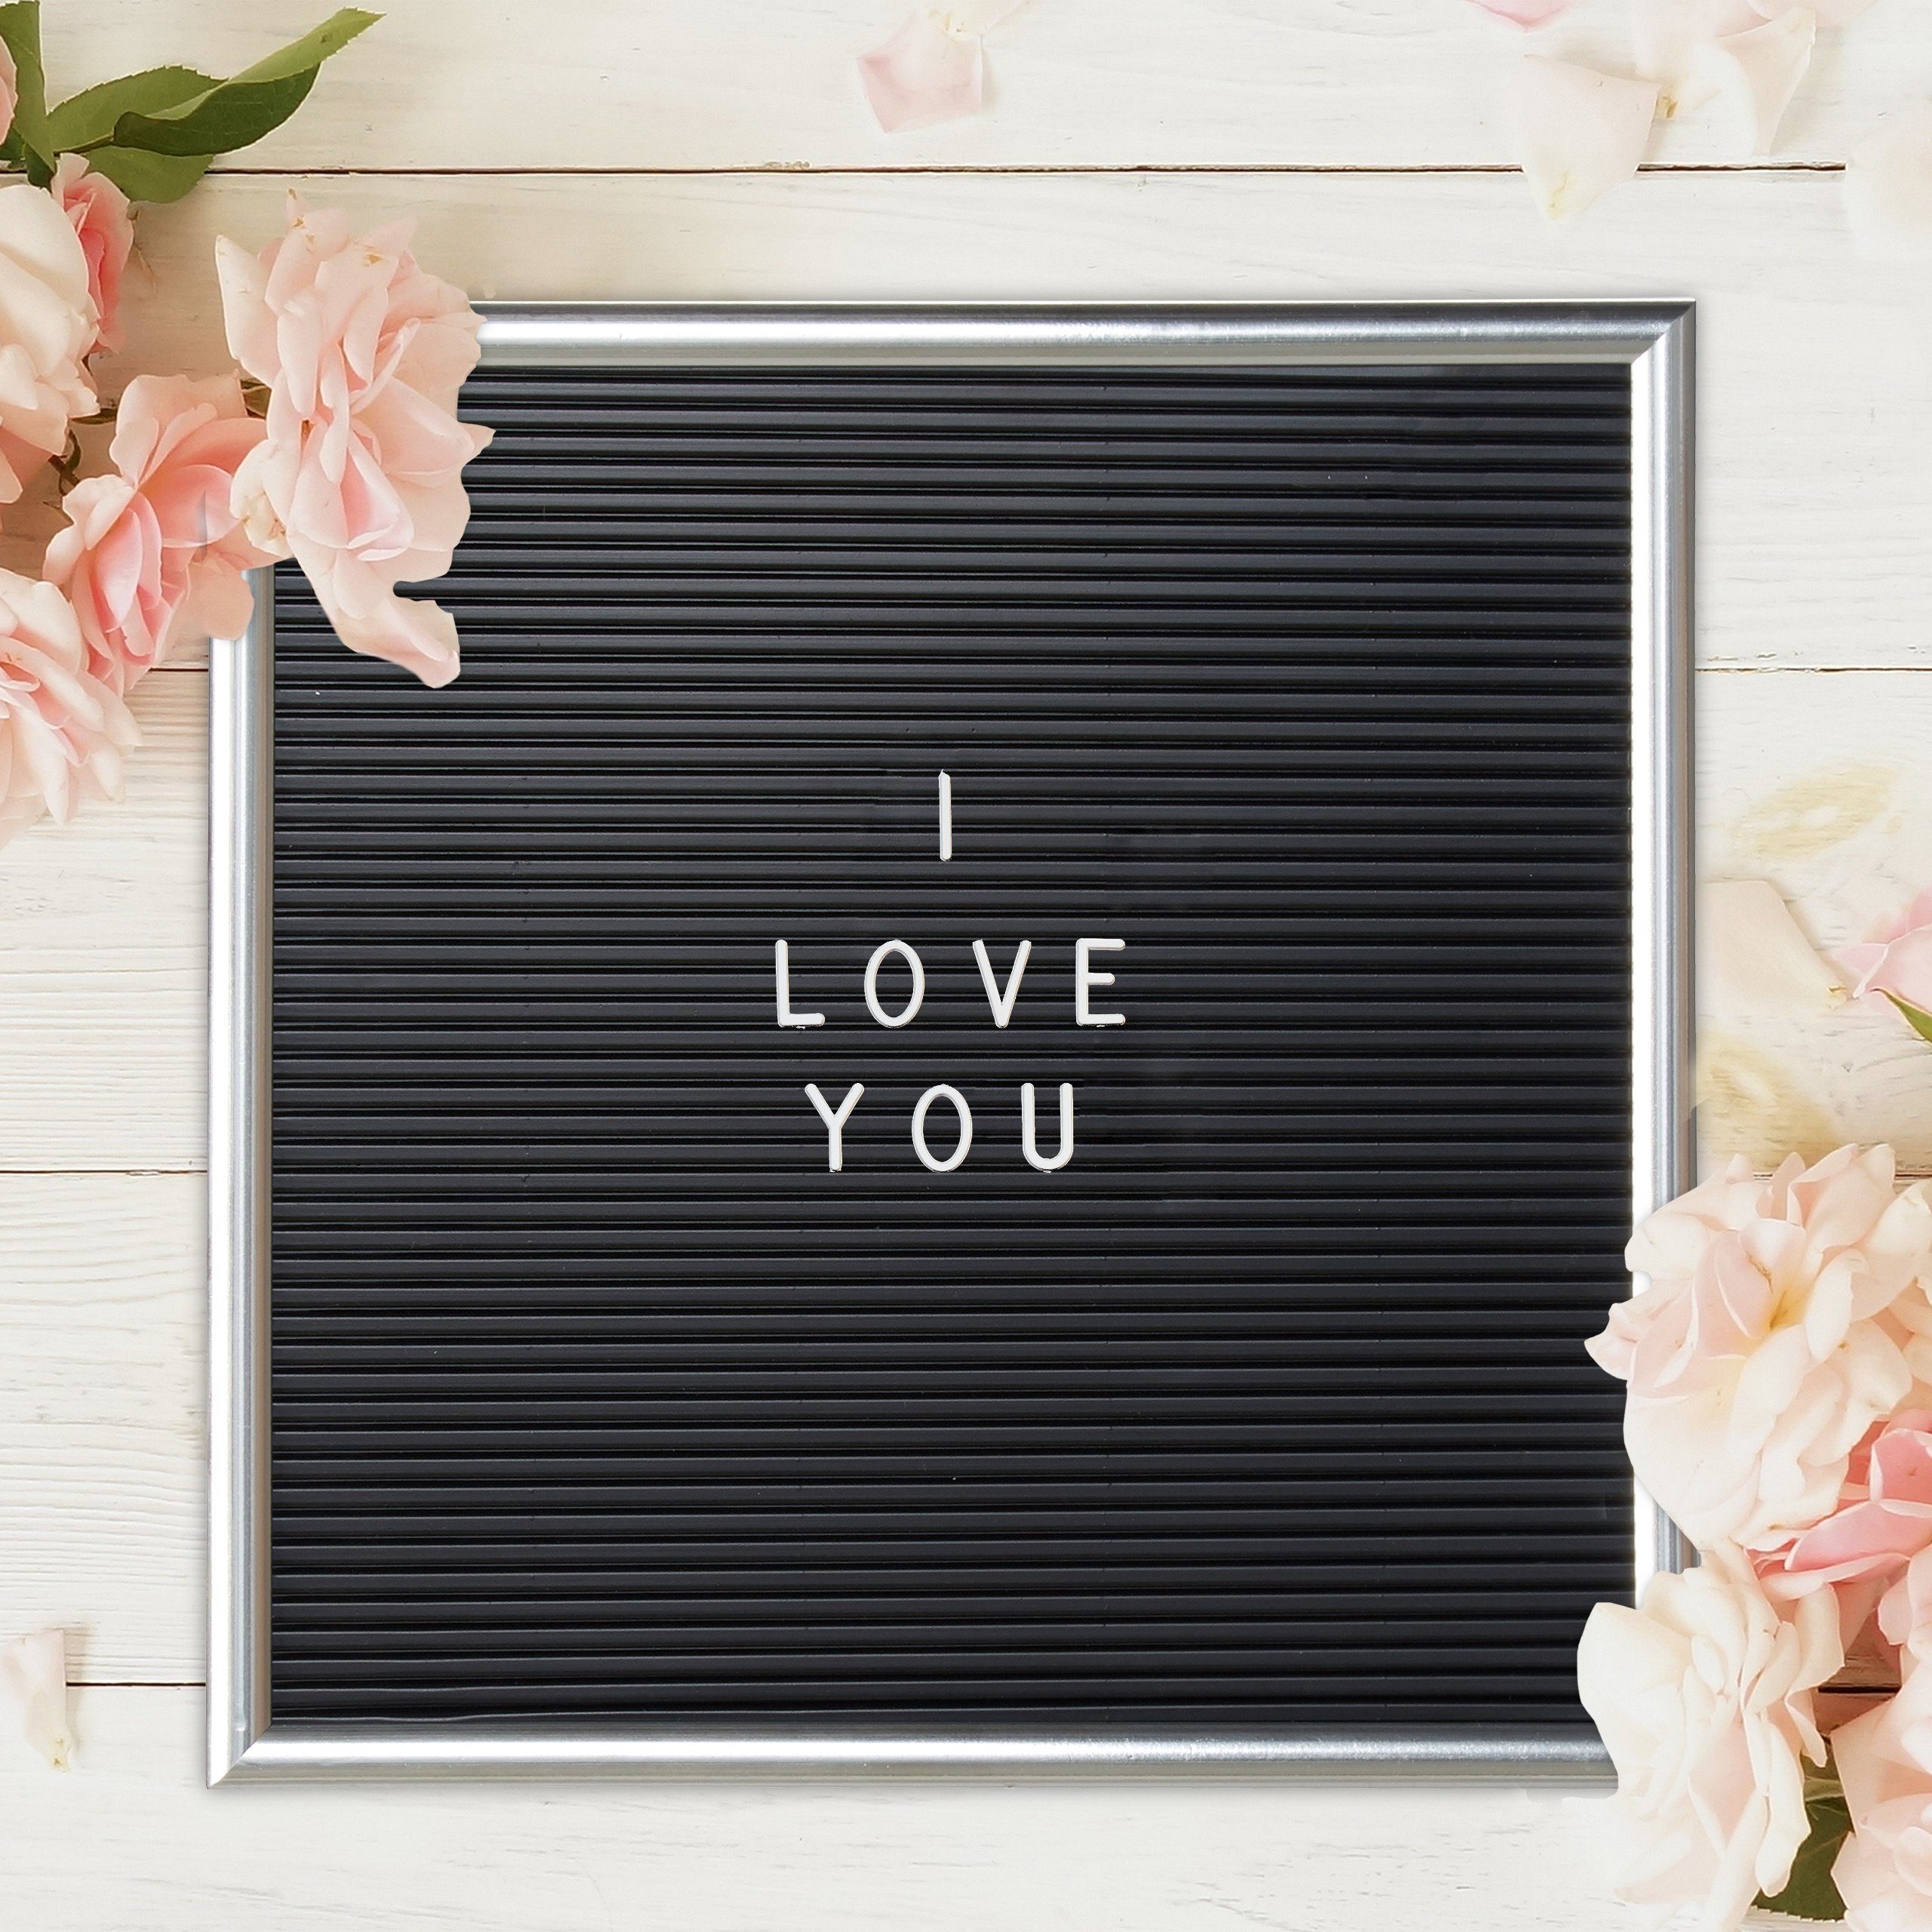 x cm Memoboard silber 2 x 30 Letterboard 30 relaxdays